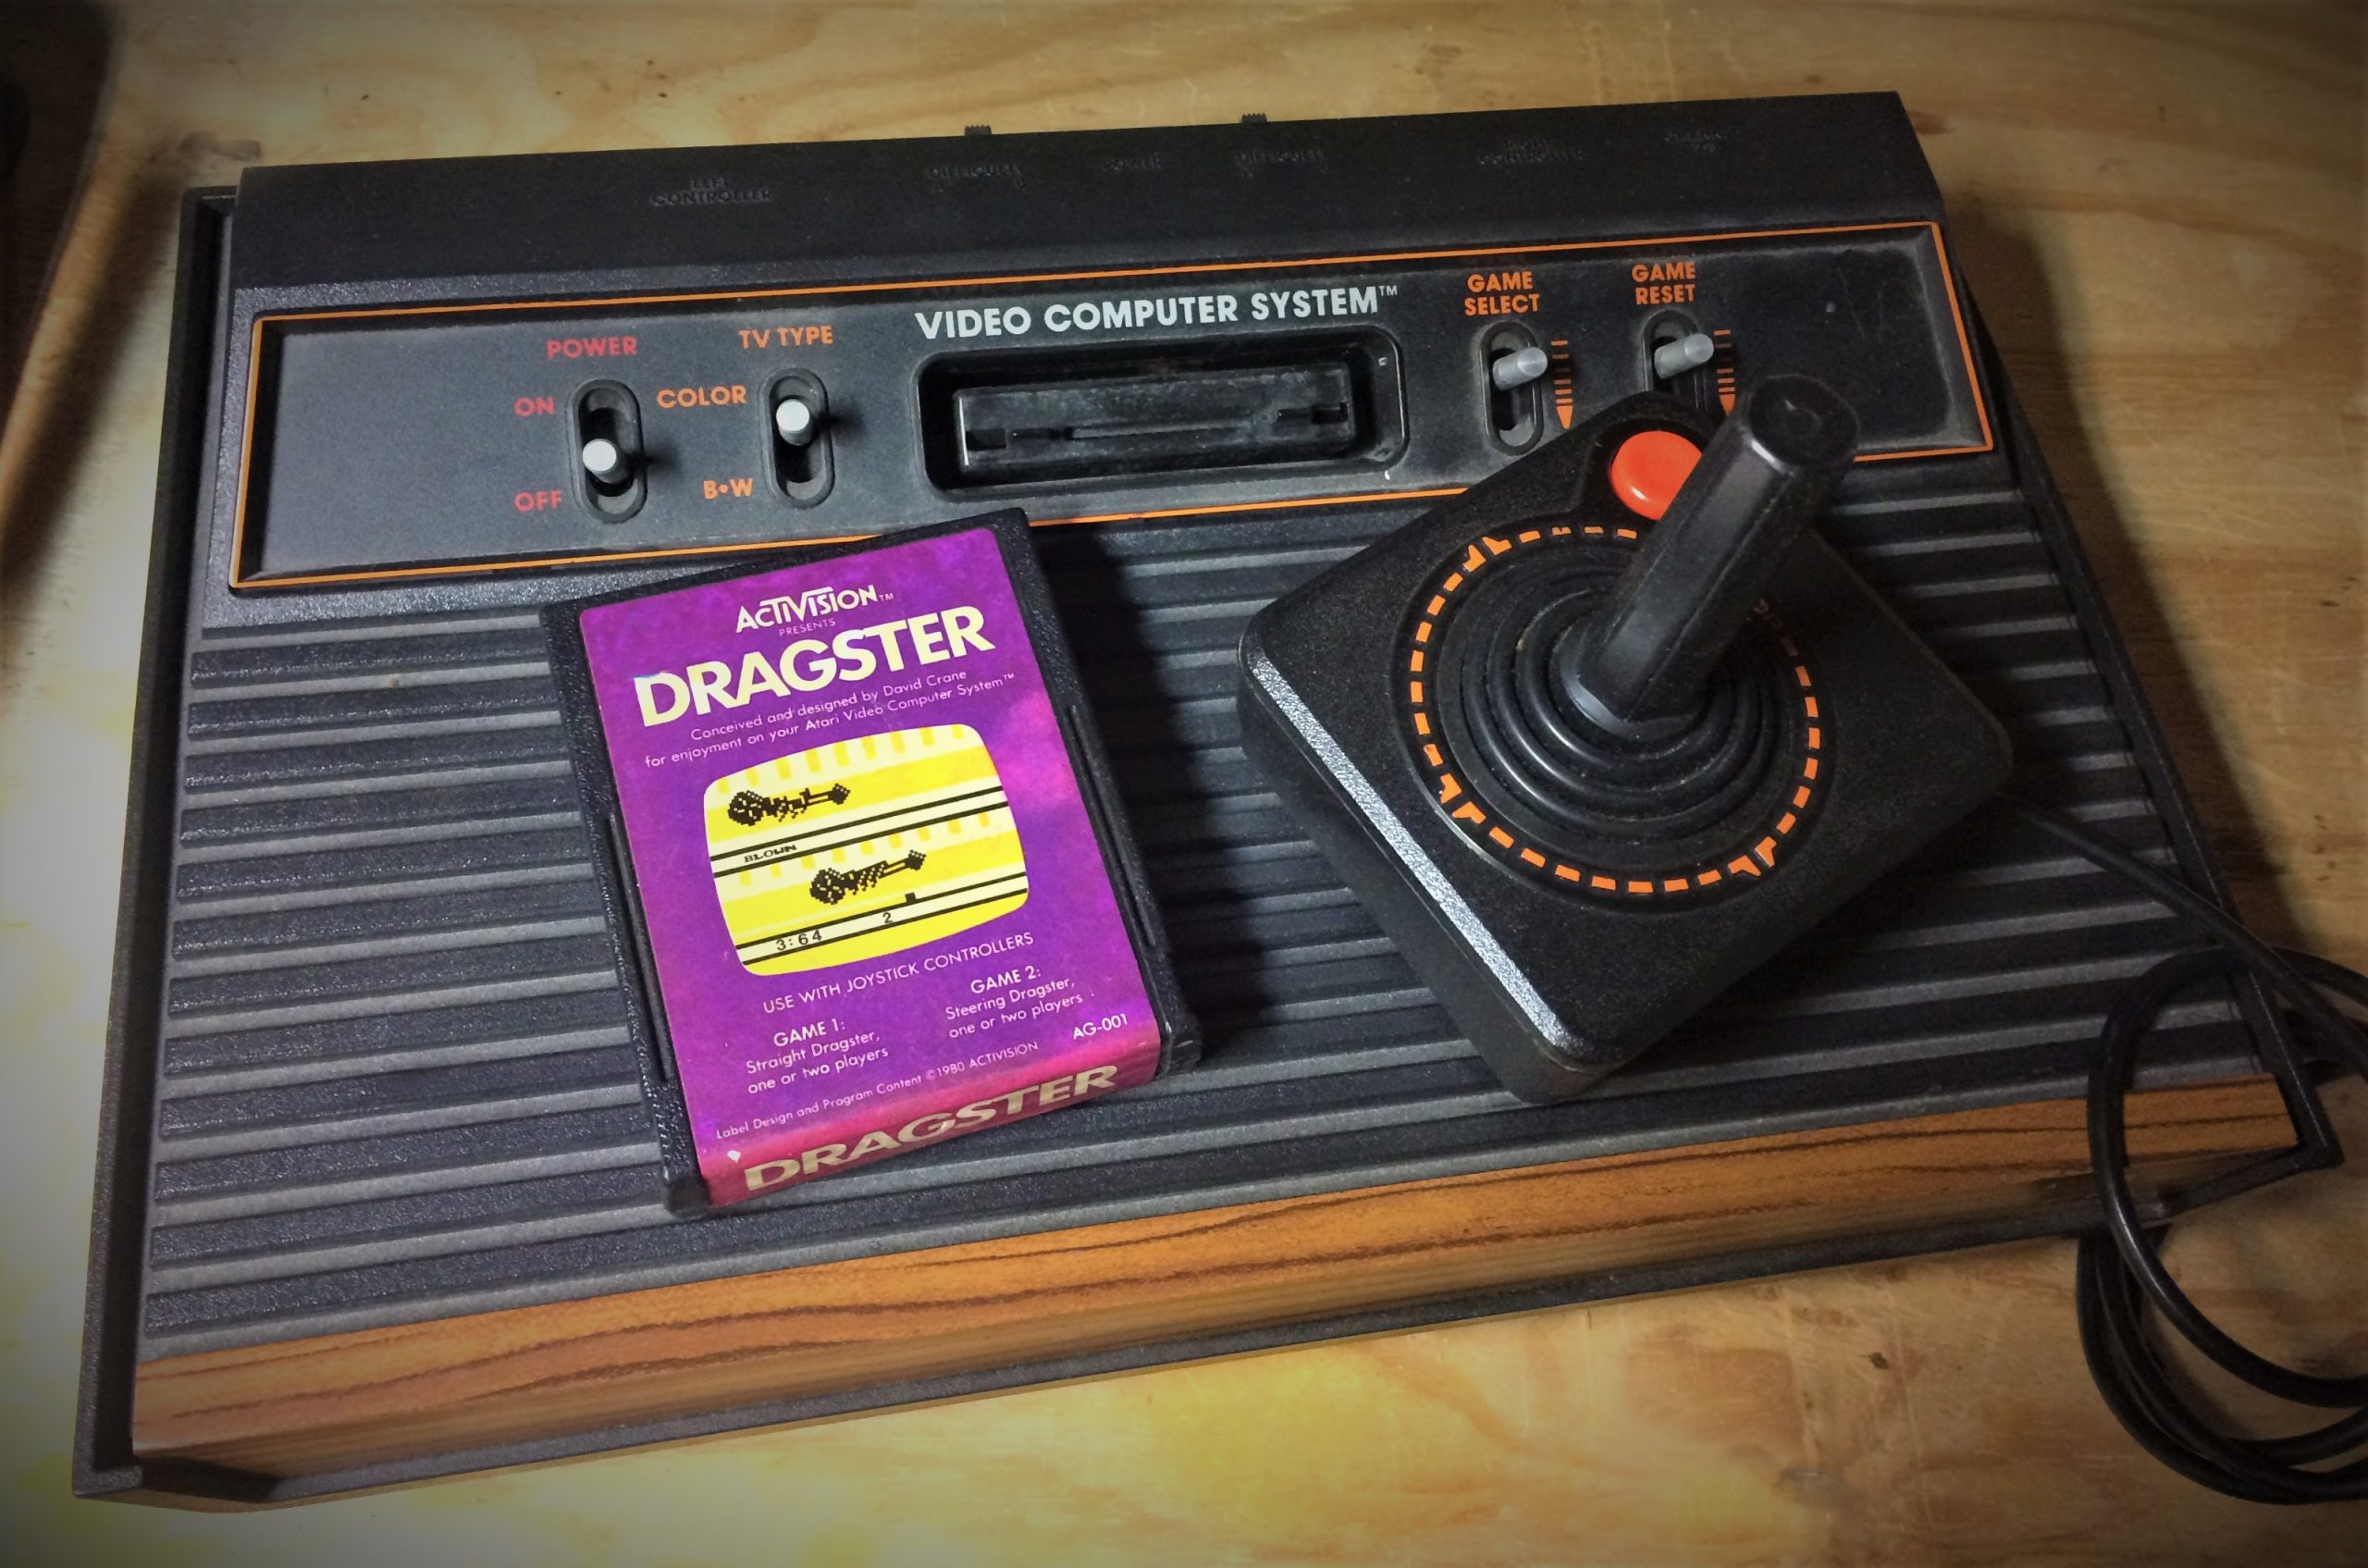 atari-2600-console-with-activision-dragster-placed-on-top-vintage-video-game-racing-scaled.jpg